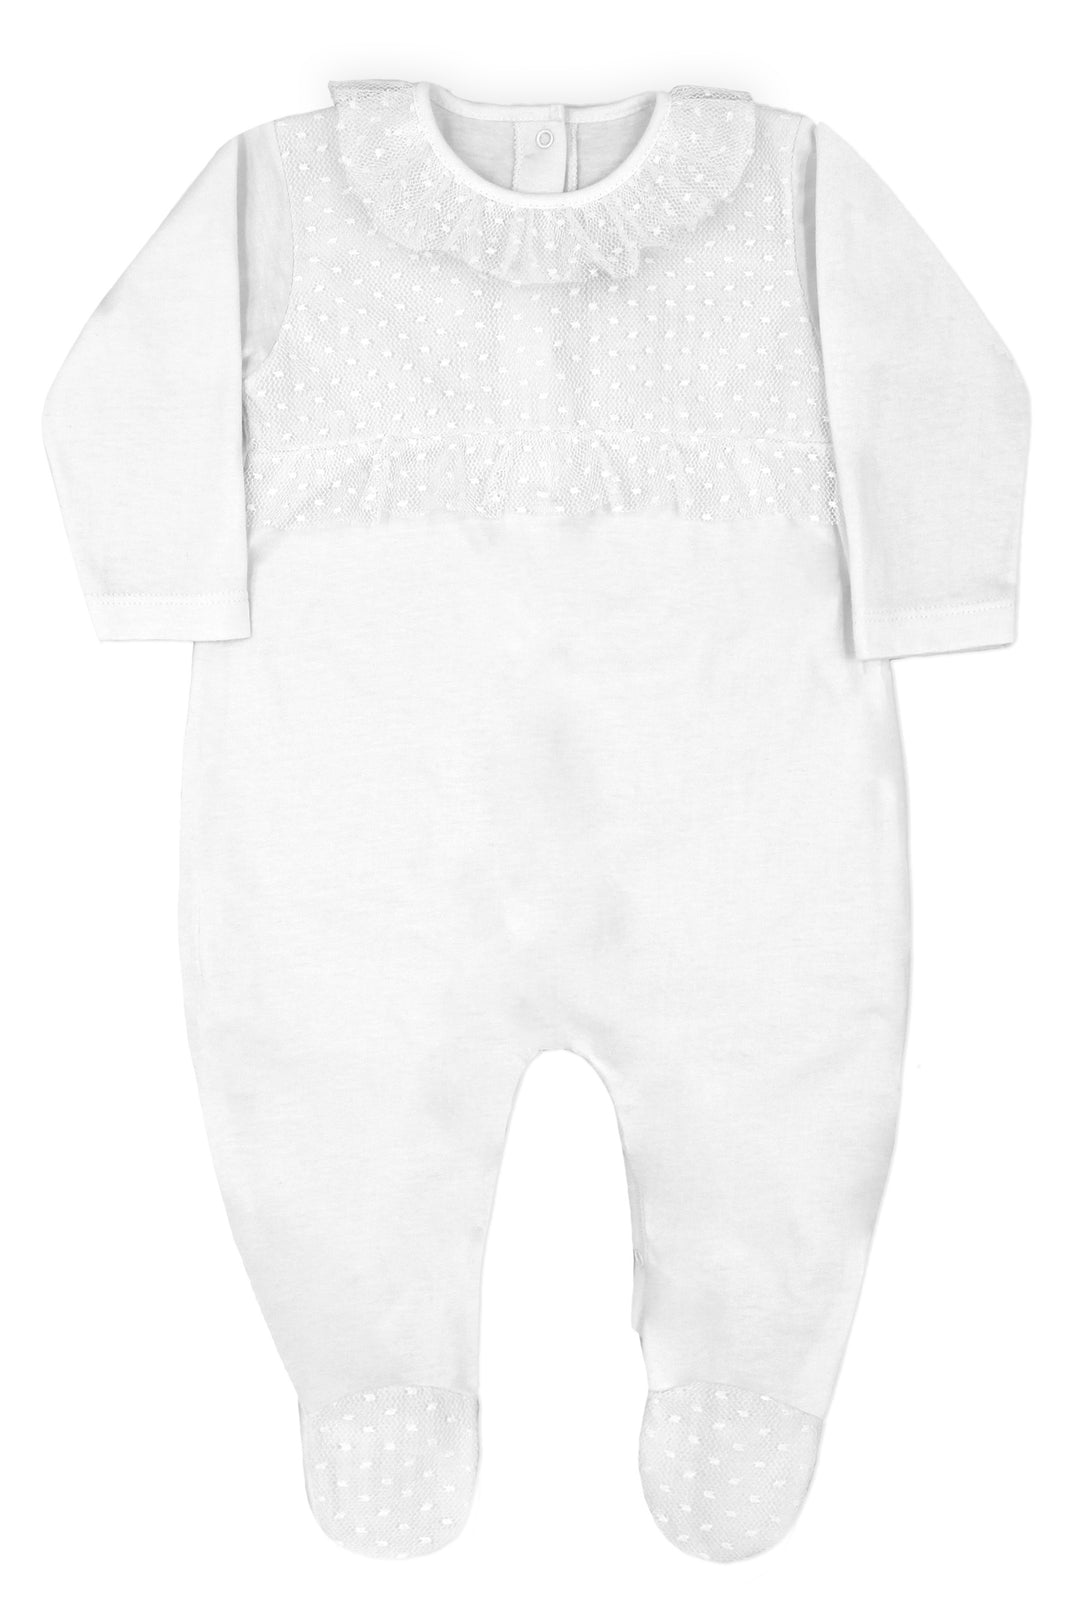 Rapife PREORDER "Anna" White Tulle Sleepsuit | Millie and John